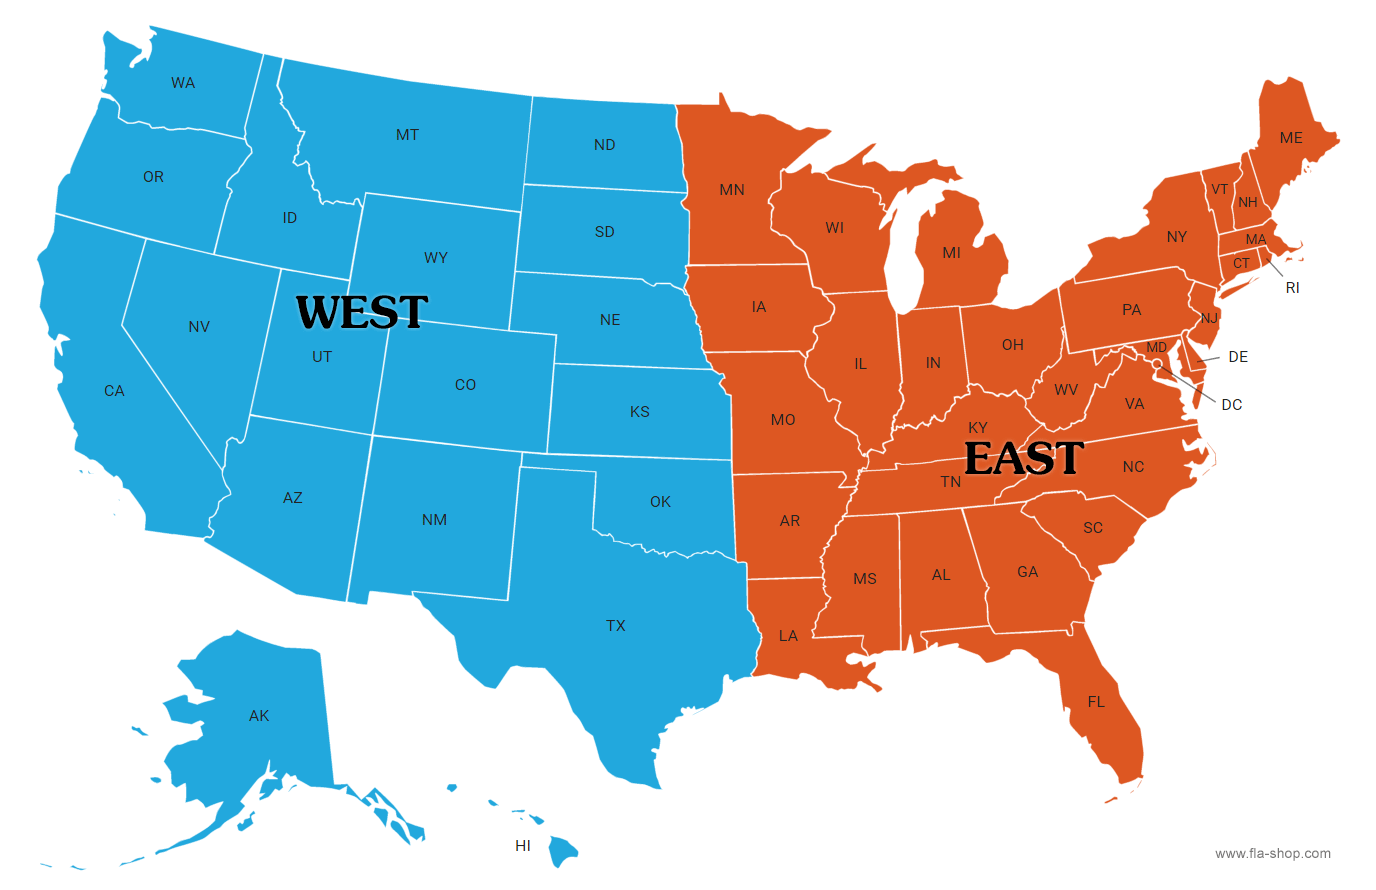 Map of the U.S. with 2 regions